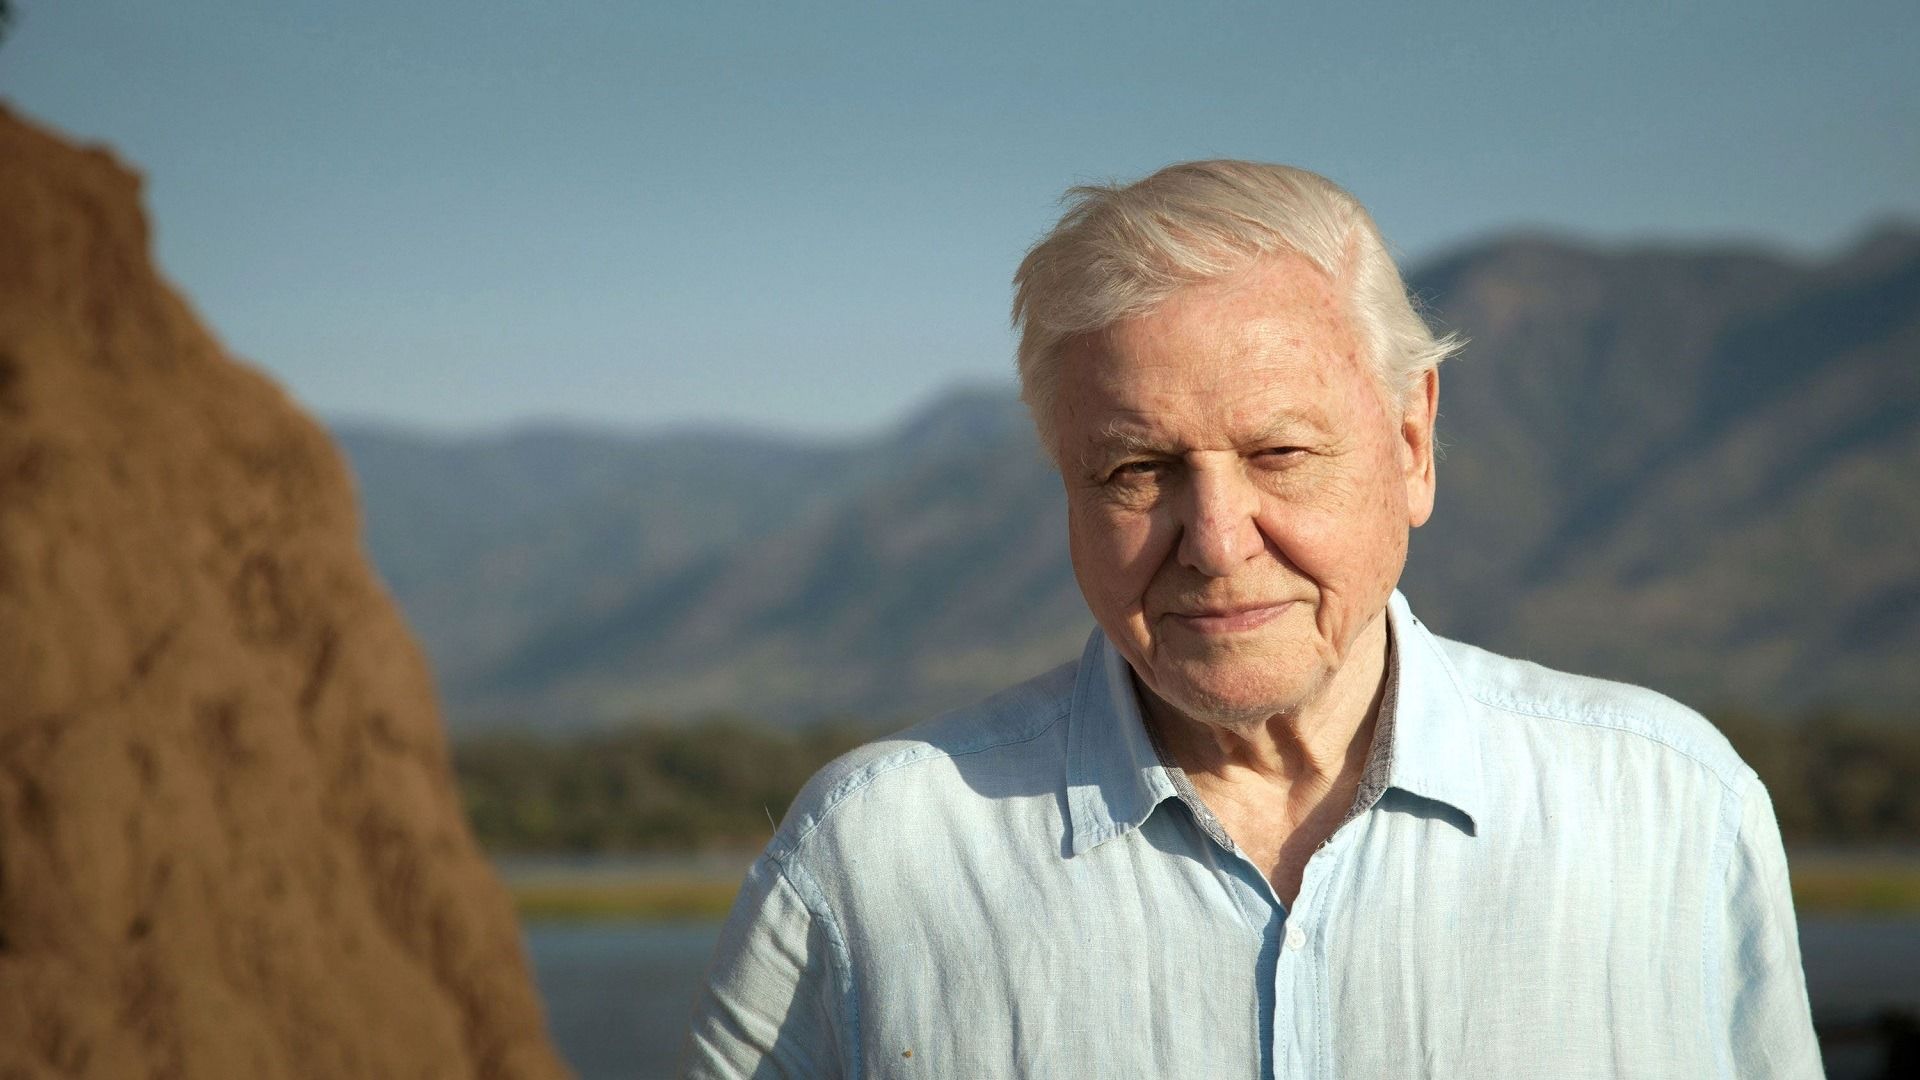 David Attenborough: A Life On Our Planet + Satellite Q&A is Clapham